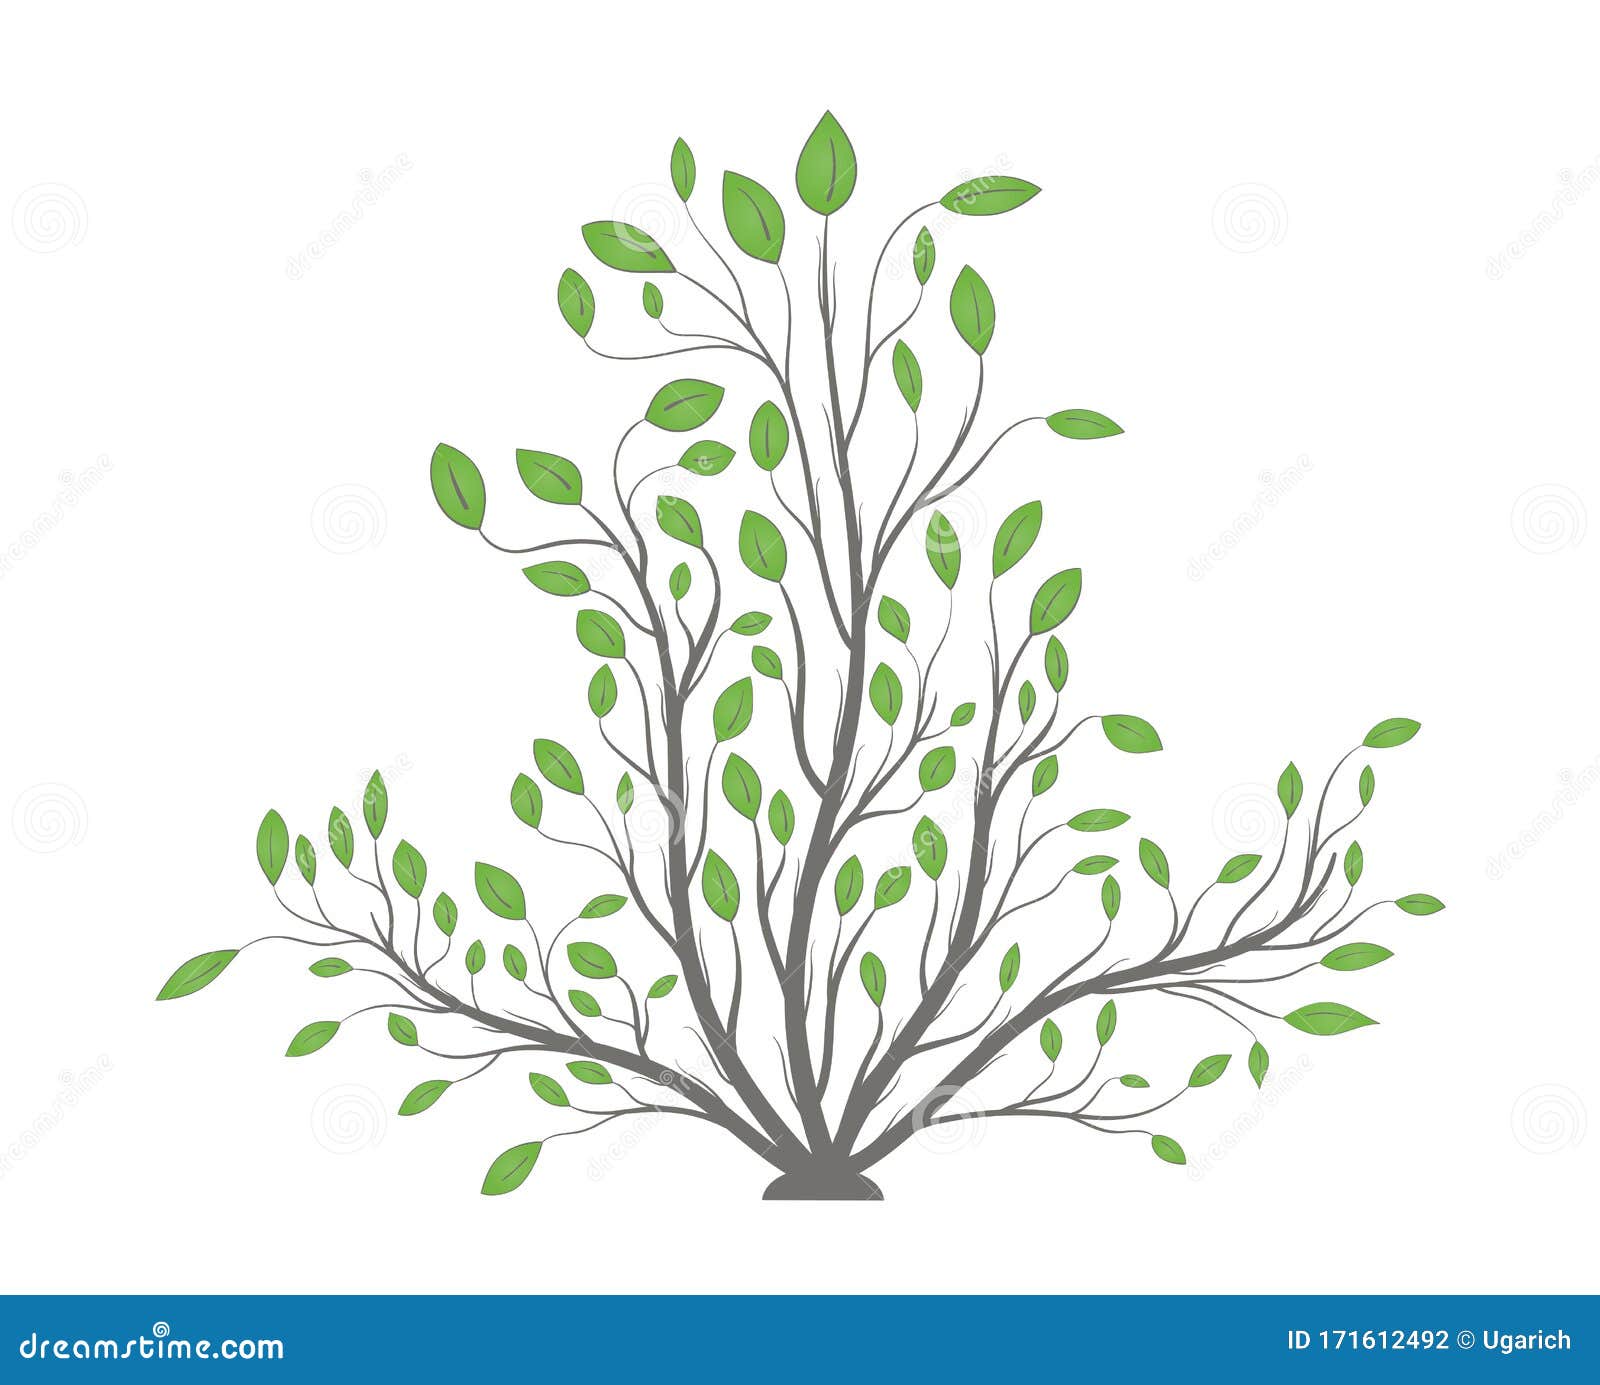 Bush Plants With Branches And Green Leaves Stock Vector Illustration